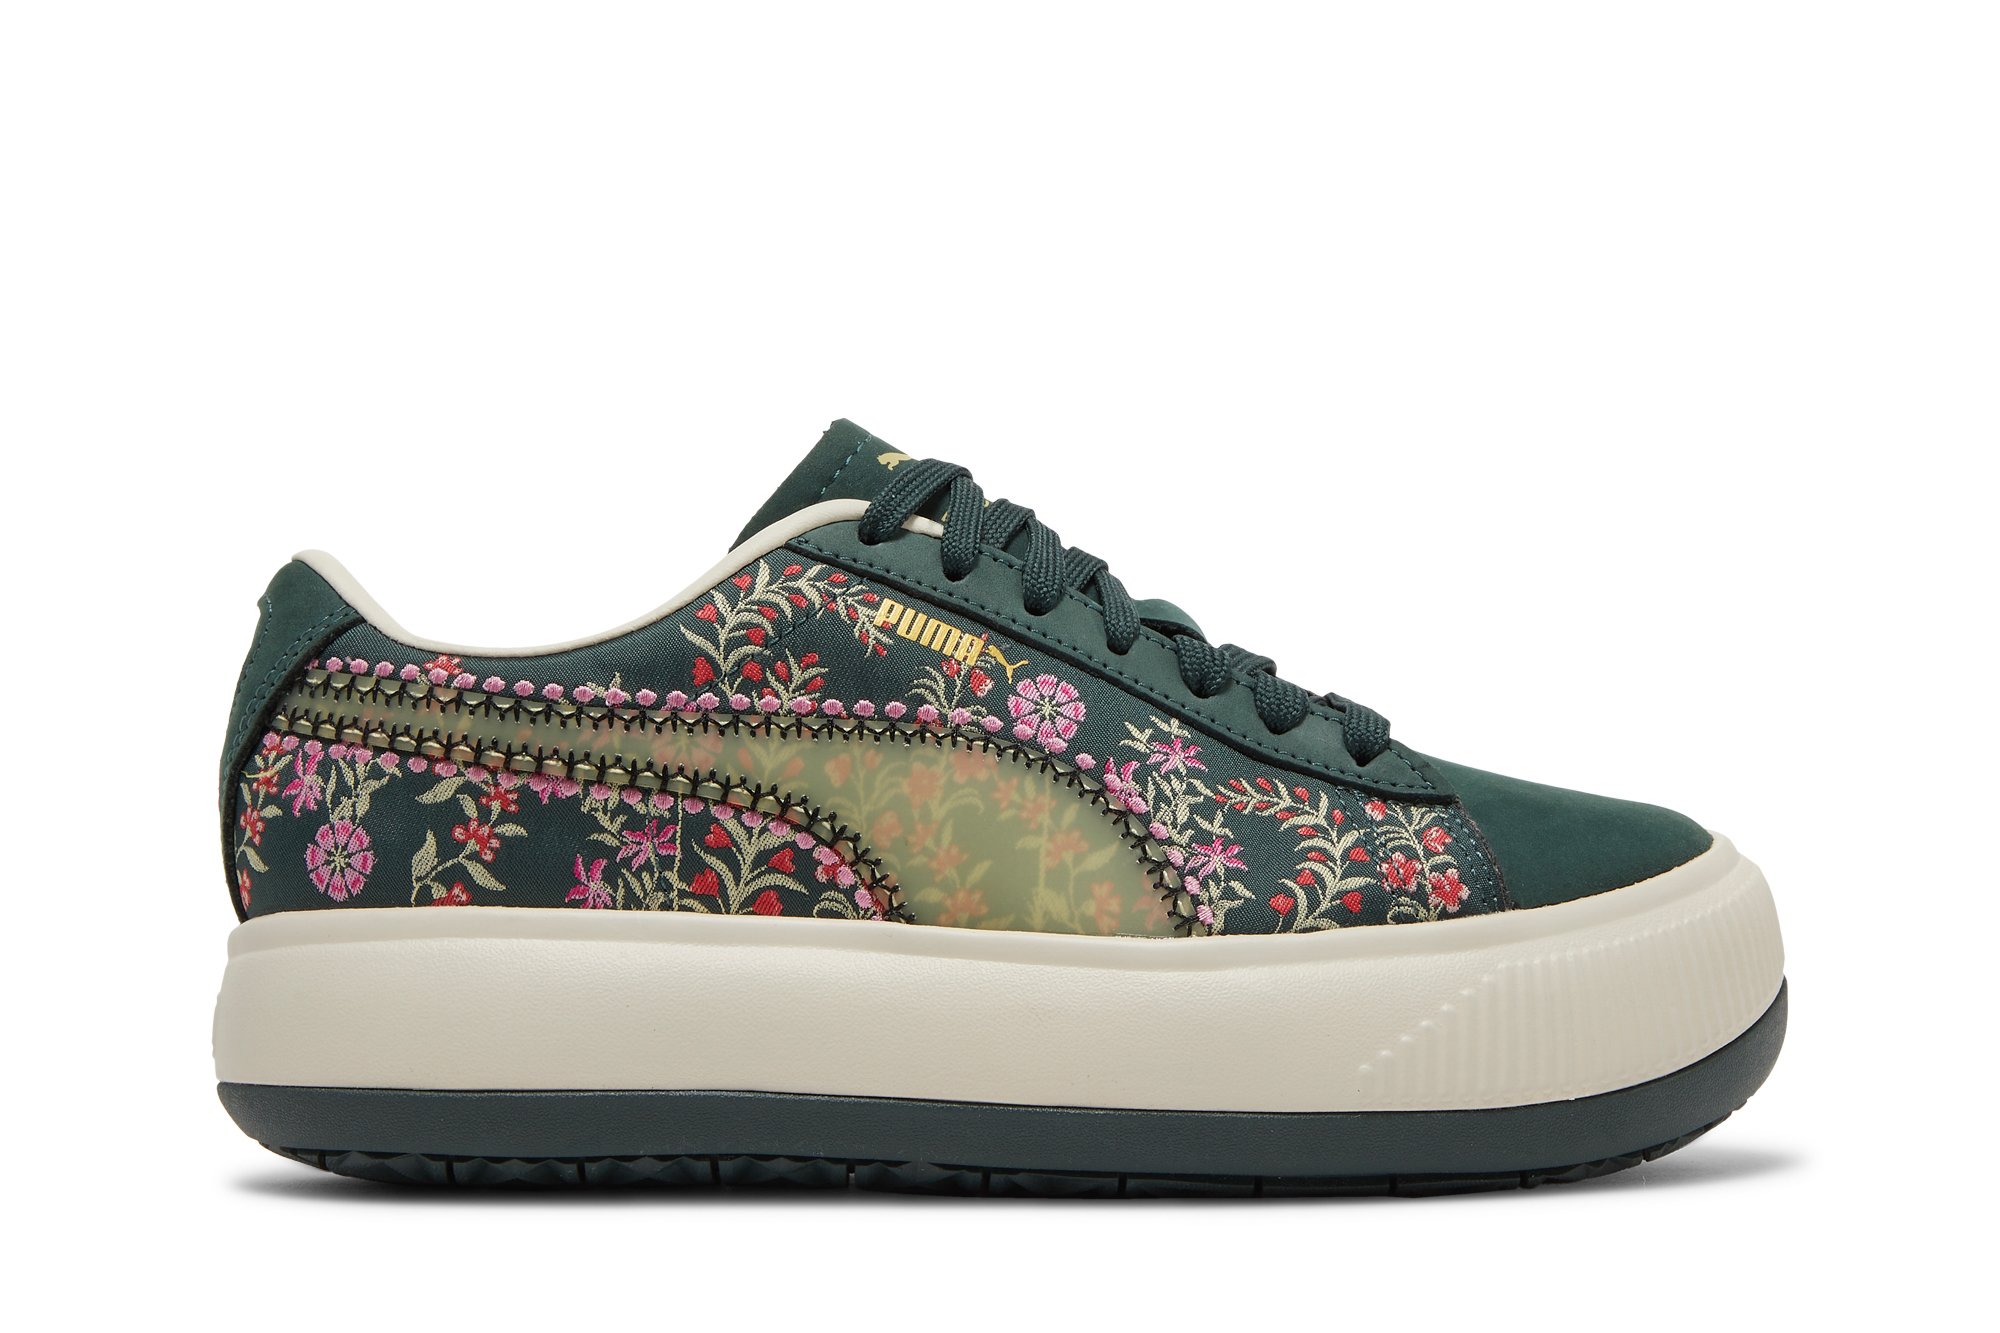 Buy Liberty of London x Wmns Suede Mayu 'Floral' - 382191 01 | GOAT